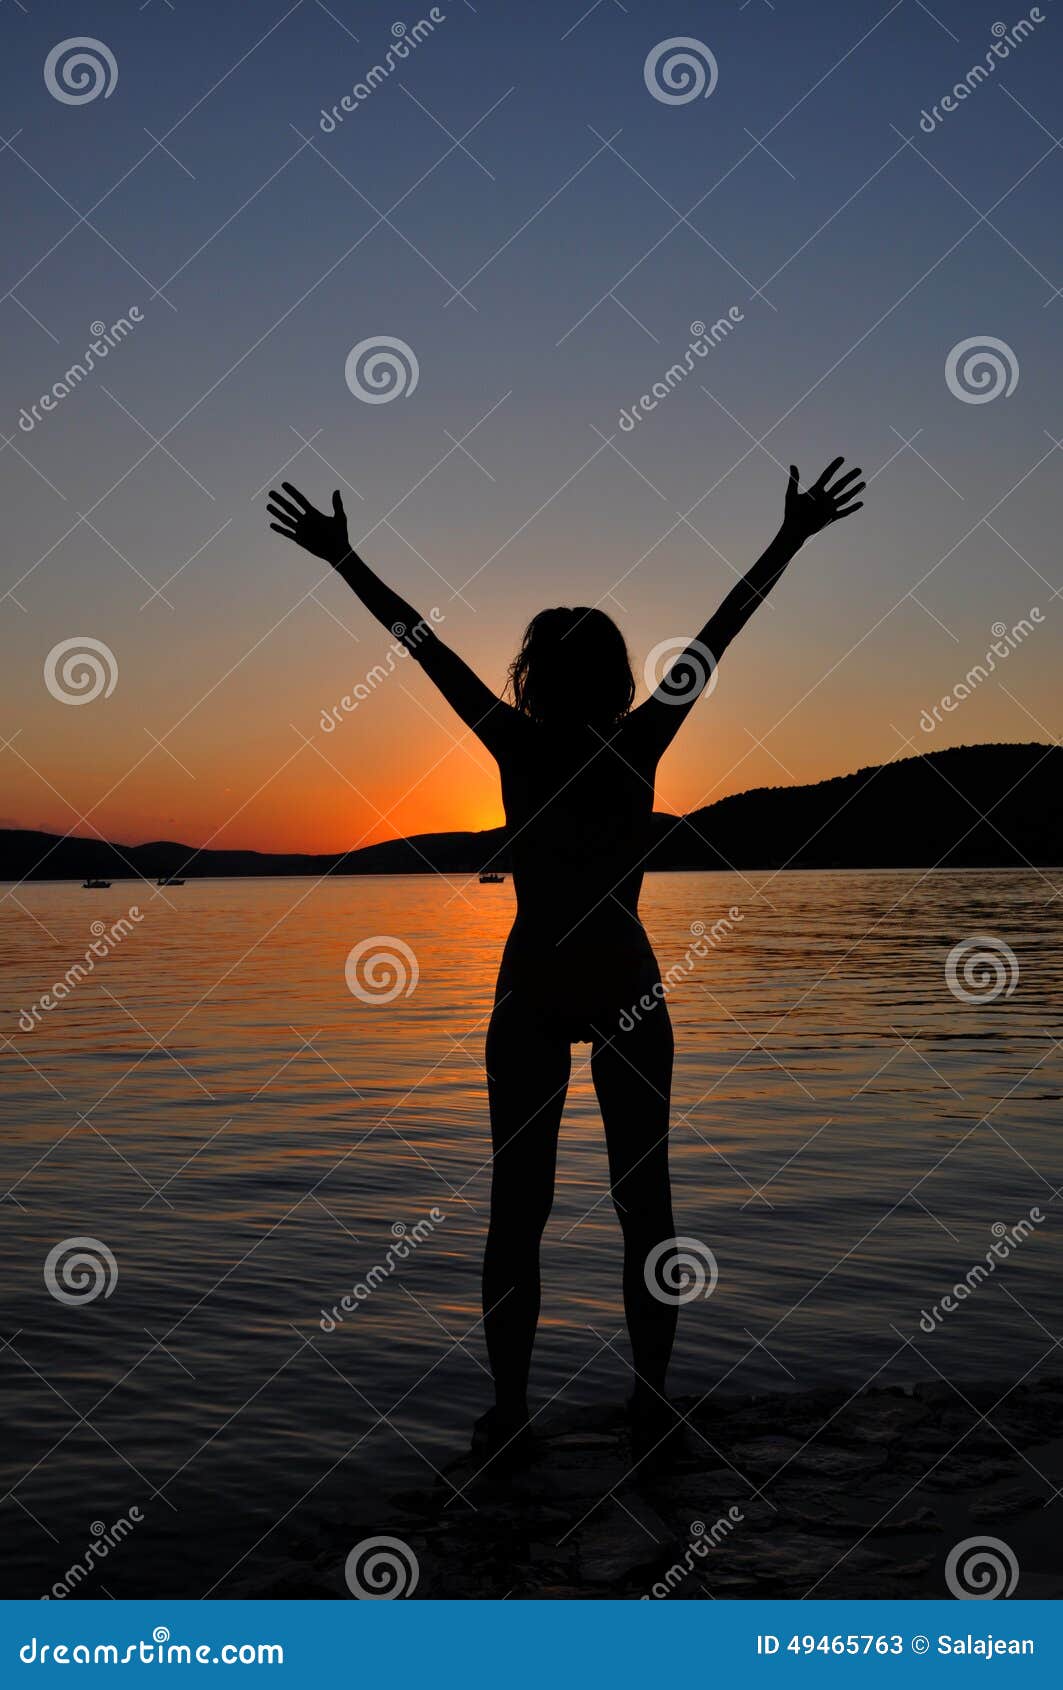 Girl Posing At Sunset On The Beach Stock Image Image Of Energy Philippines 49465763 